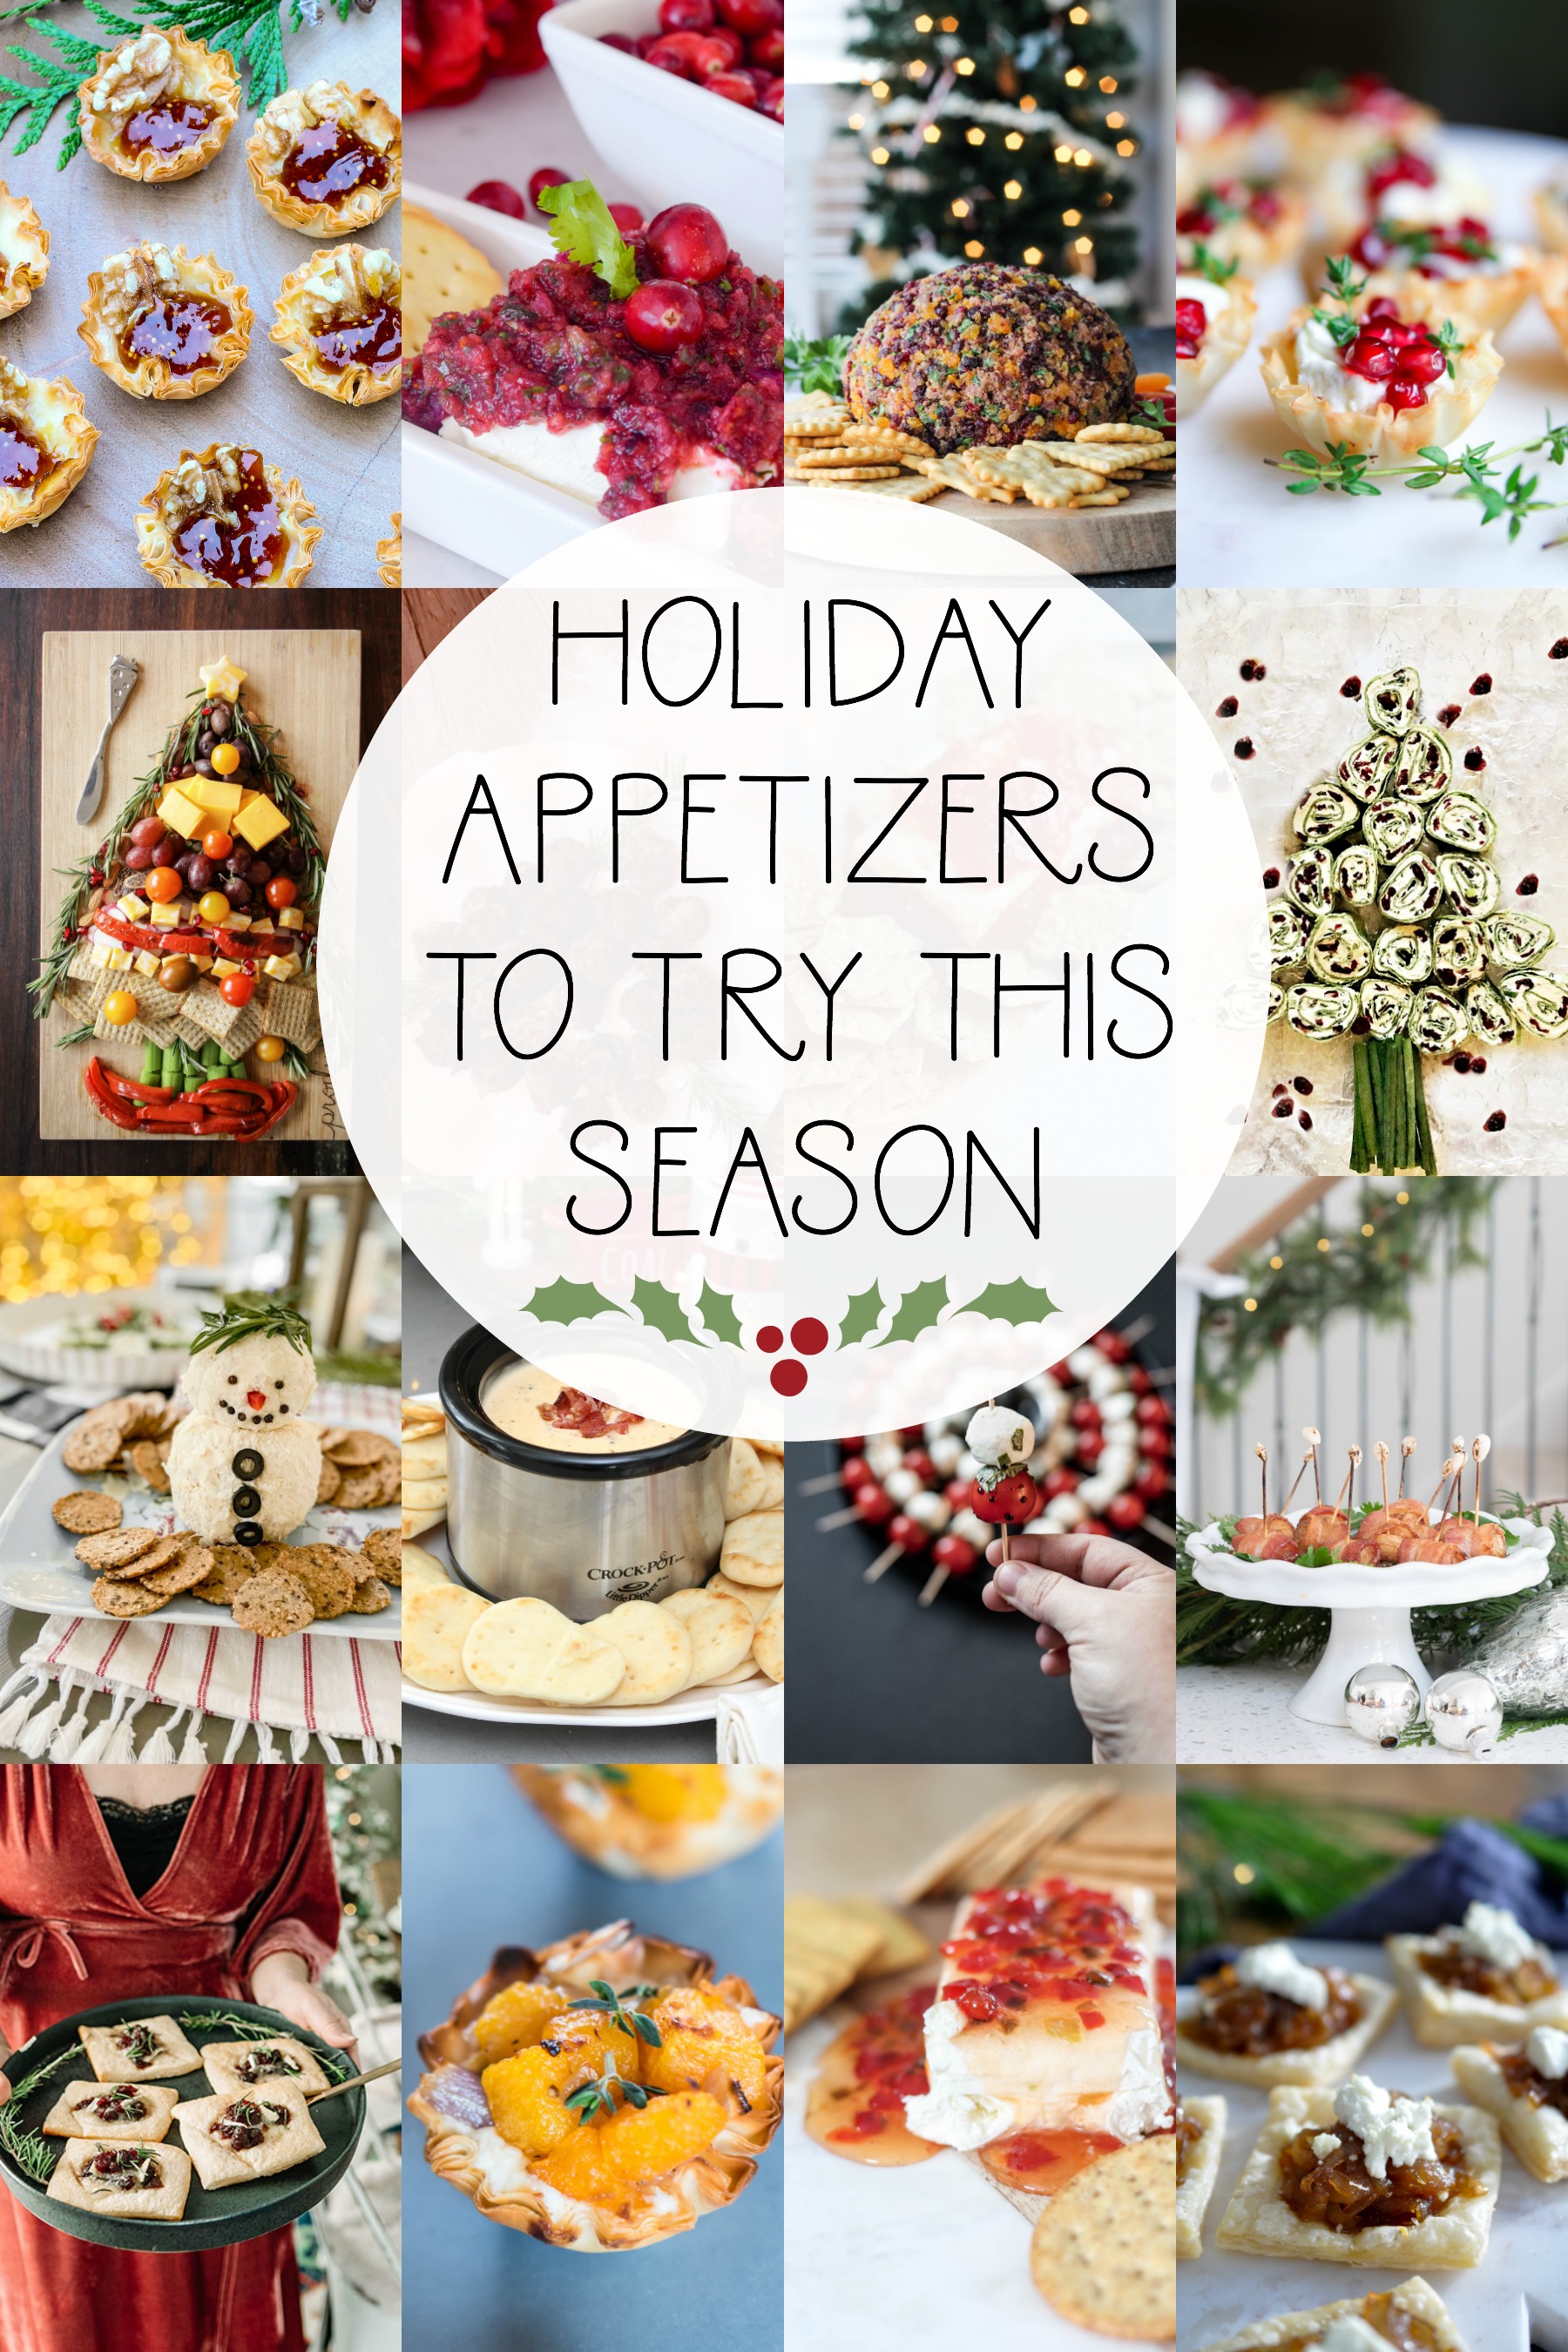 Holiday Appetizers to try this Season